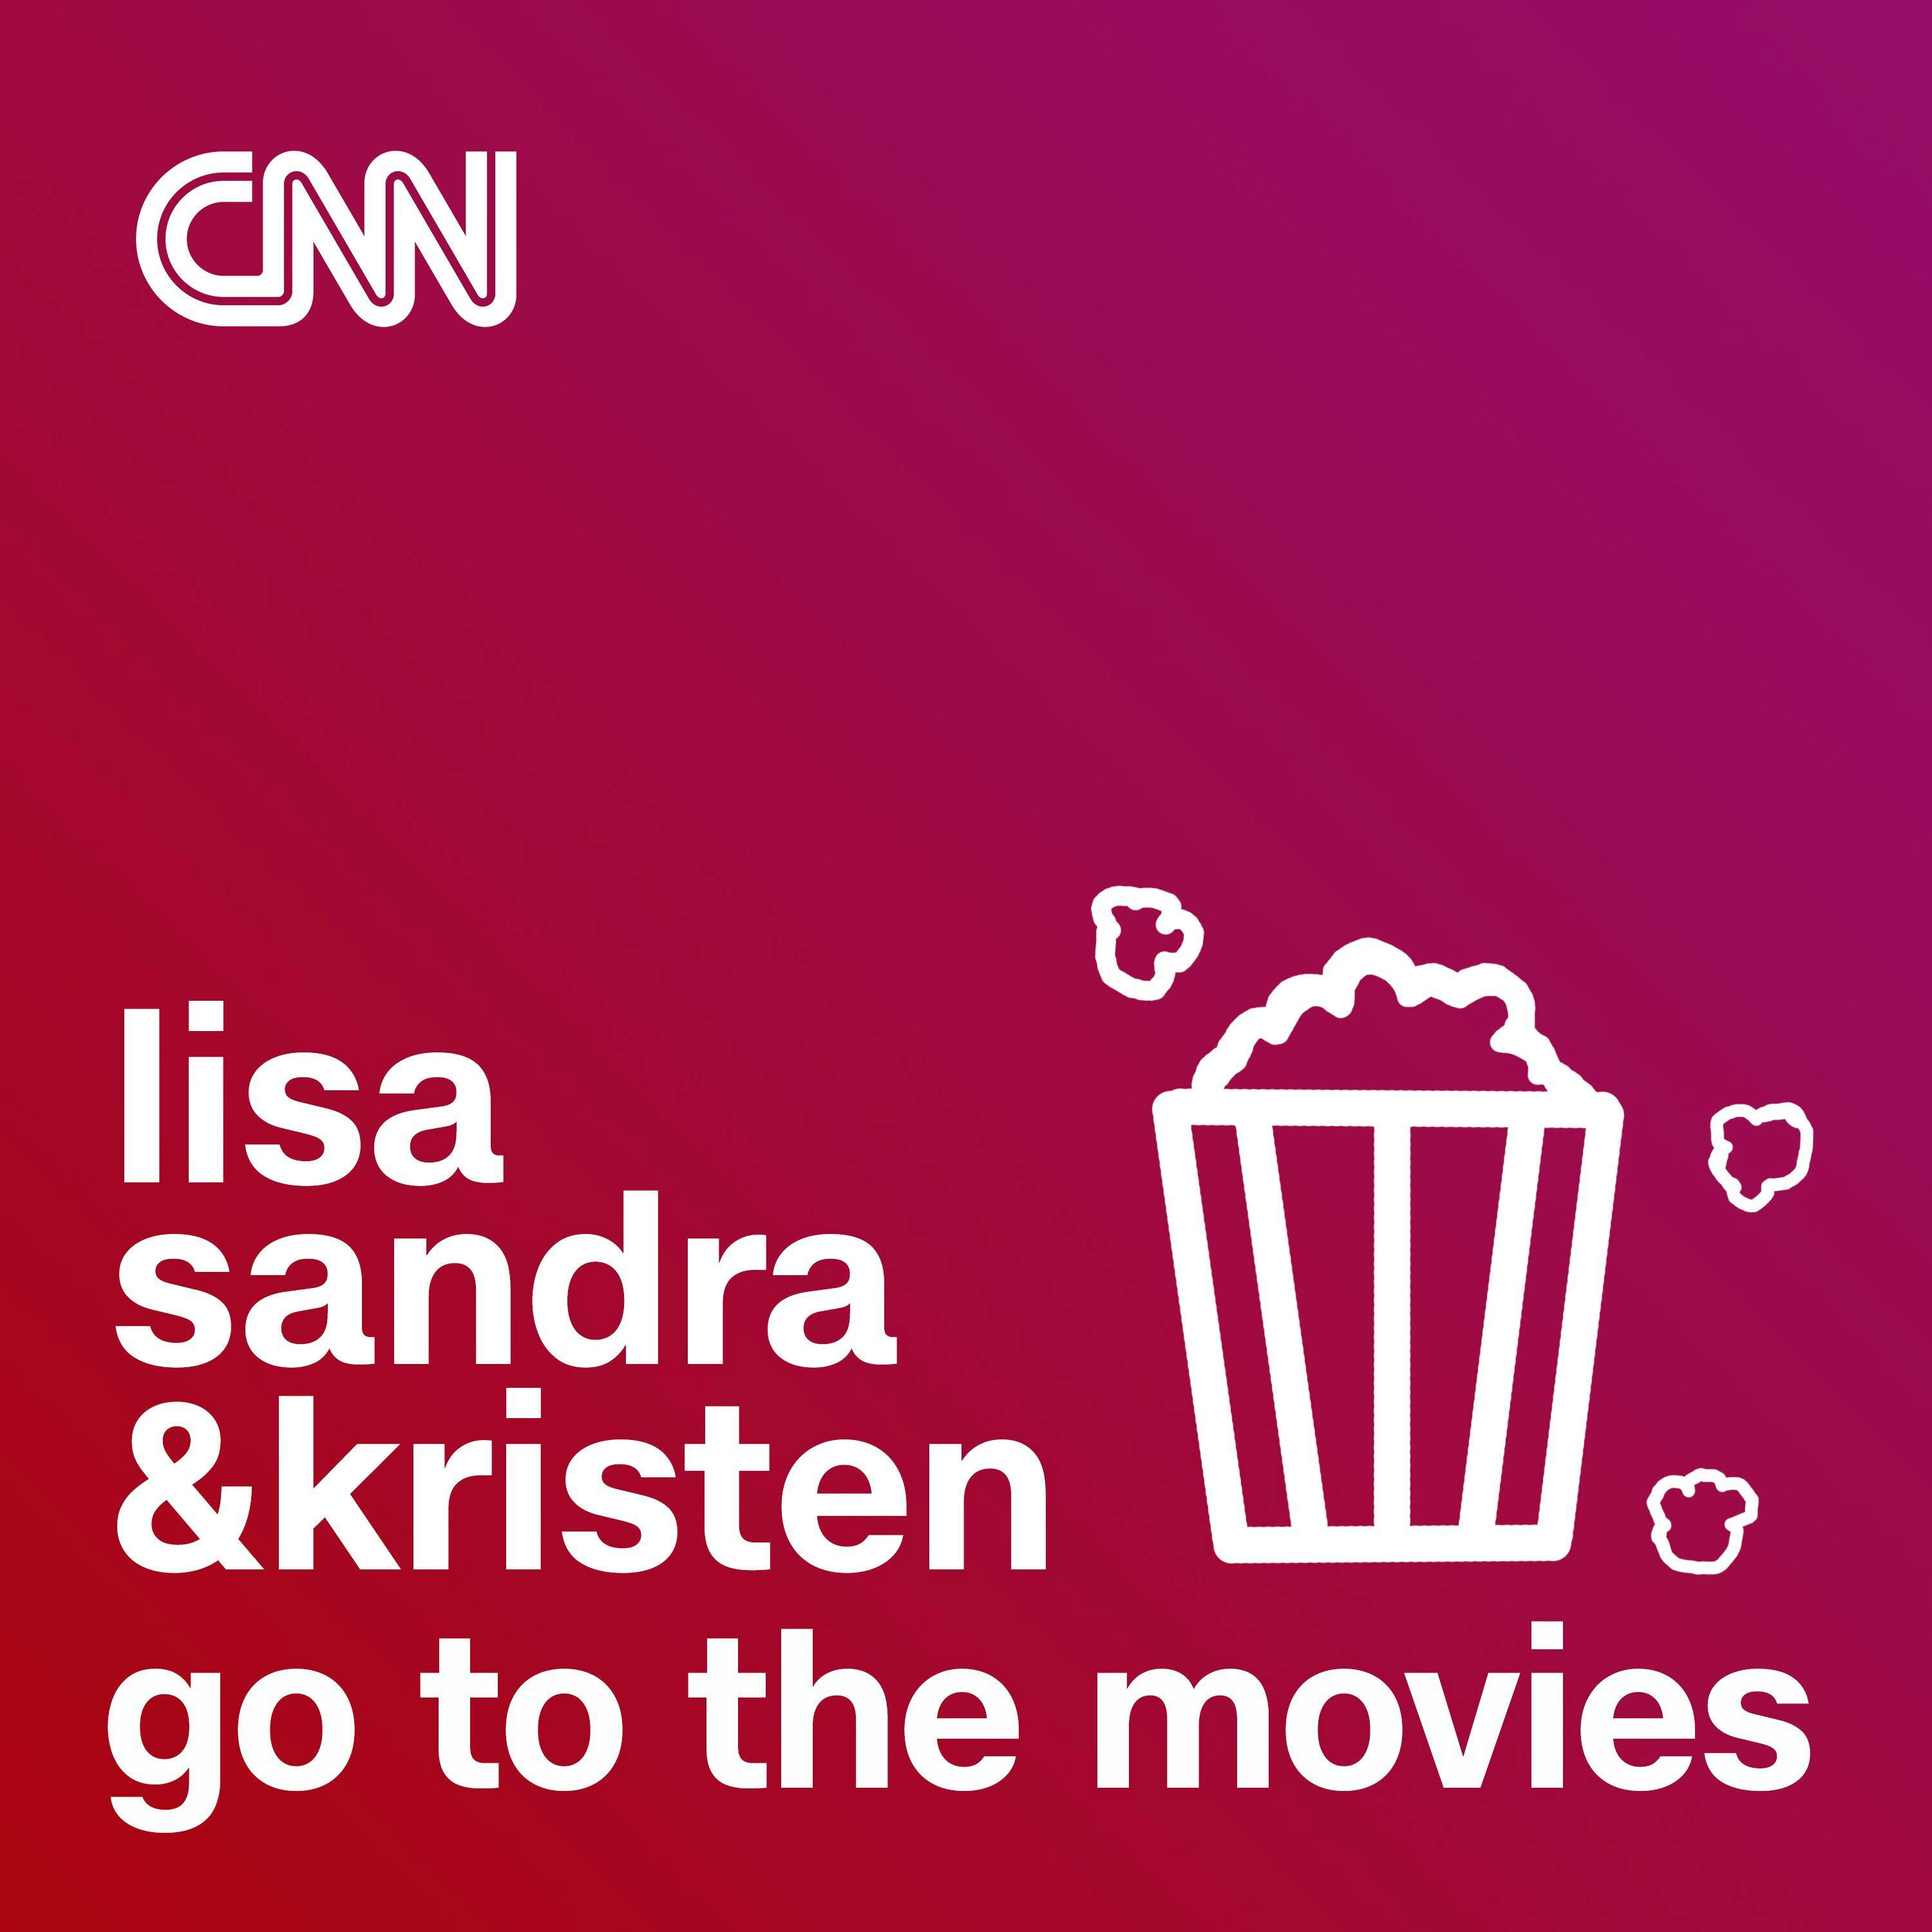 Introducing Lisa, Sandra and Kristen Go to the Movies!